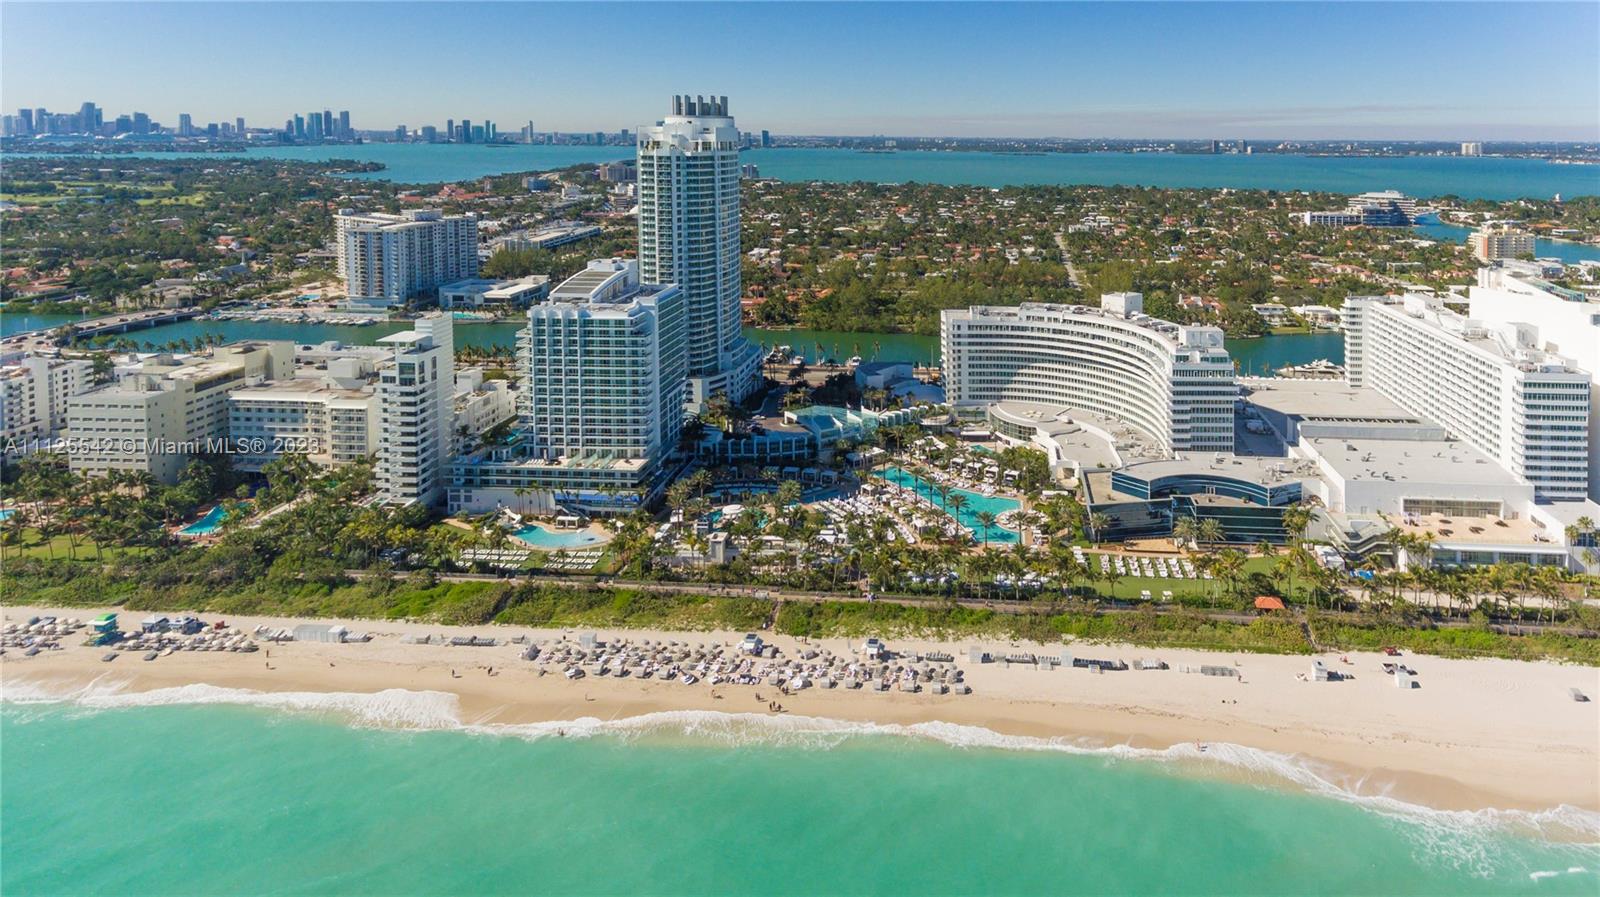 Beautiful 2BD/3BA with views of the Ocean, bay & and city. Enjoy full service, vacation-style living in a furnished turnkey unit with 2 king beds, 2 sleeper sofas, full kitchen and washer/dryer. Enroll in hotel rental program & receive income while away! The Fontainebleau Resort offers luxury amenities on 22 oceanfront acres including award-winning restaurants, LIV night club, Lapis spa & state-of-the-art fitness center. Maintenance includes : AC, local calls, electricity, valet + daily free breakfast in owners lounge.
Click the virtual tour link to see video of property & contact me directly for more info.